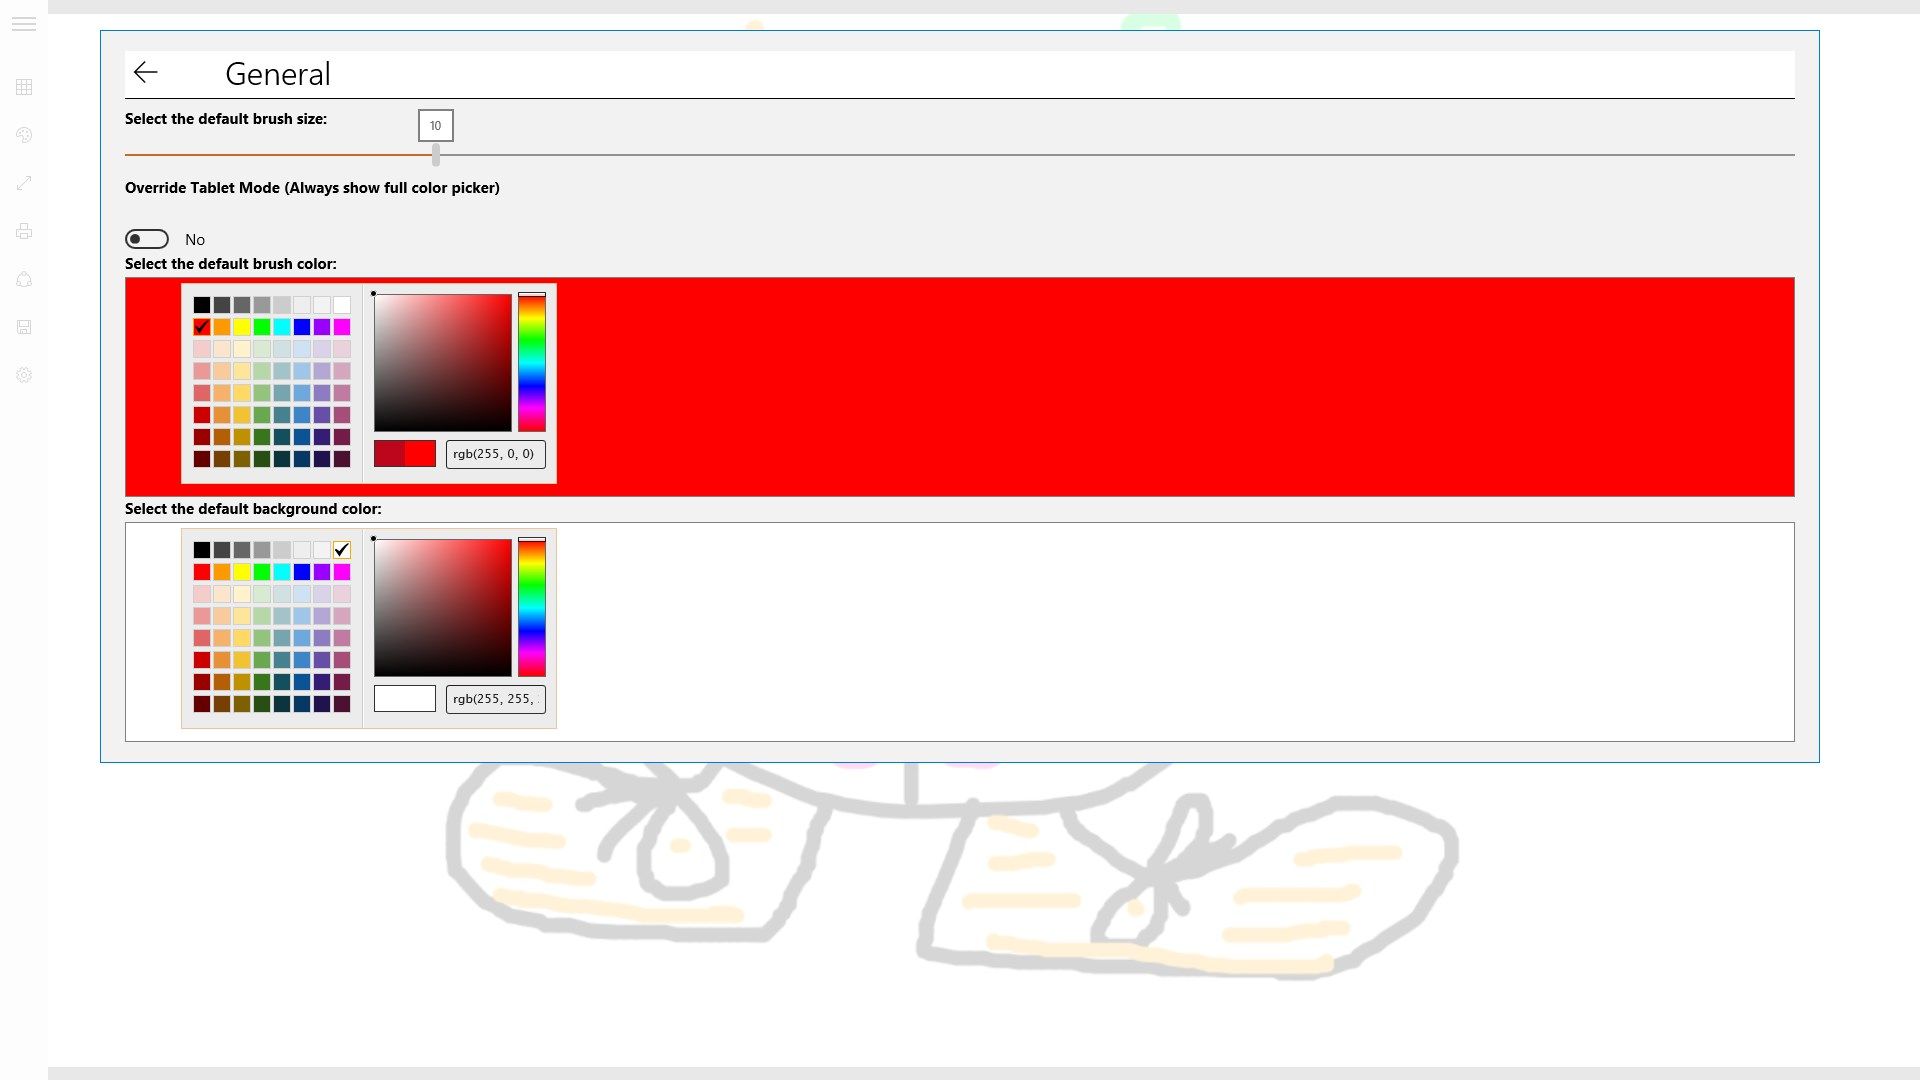 Settings allow you to specify the background color of the canvas as well as the color and size of the paint brush.